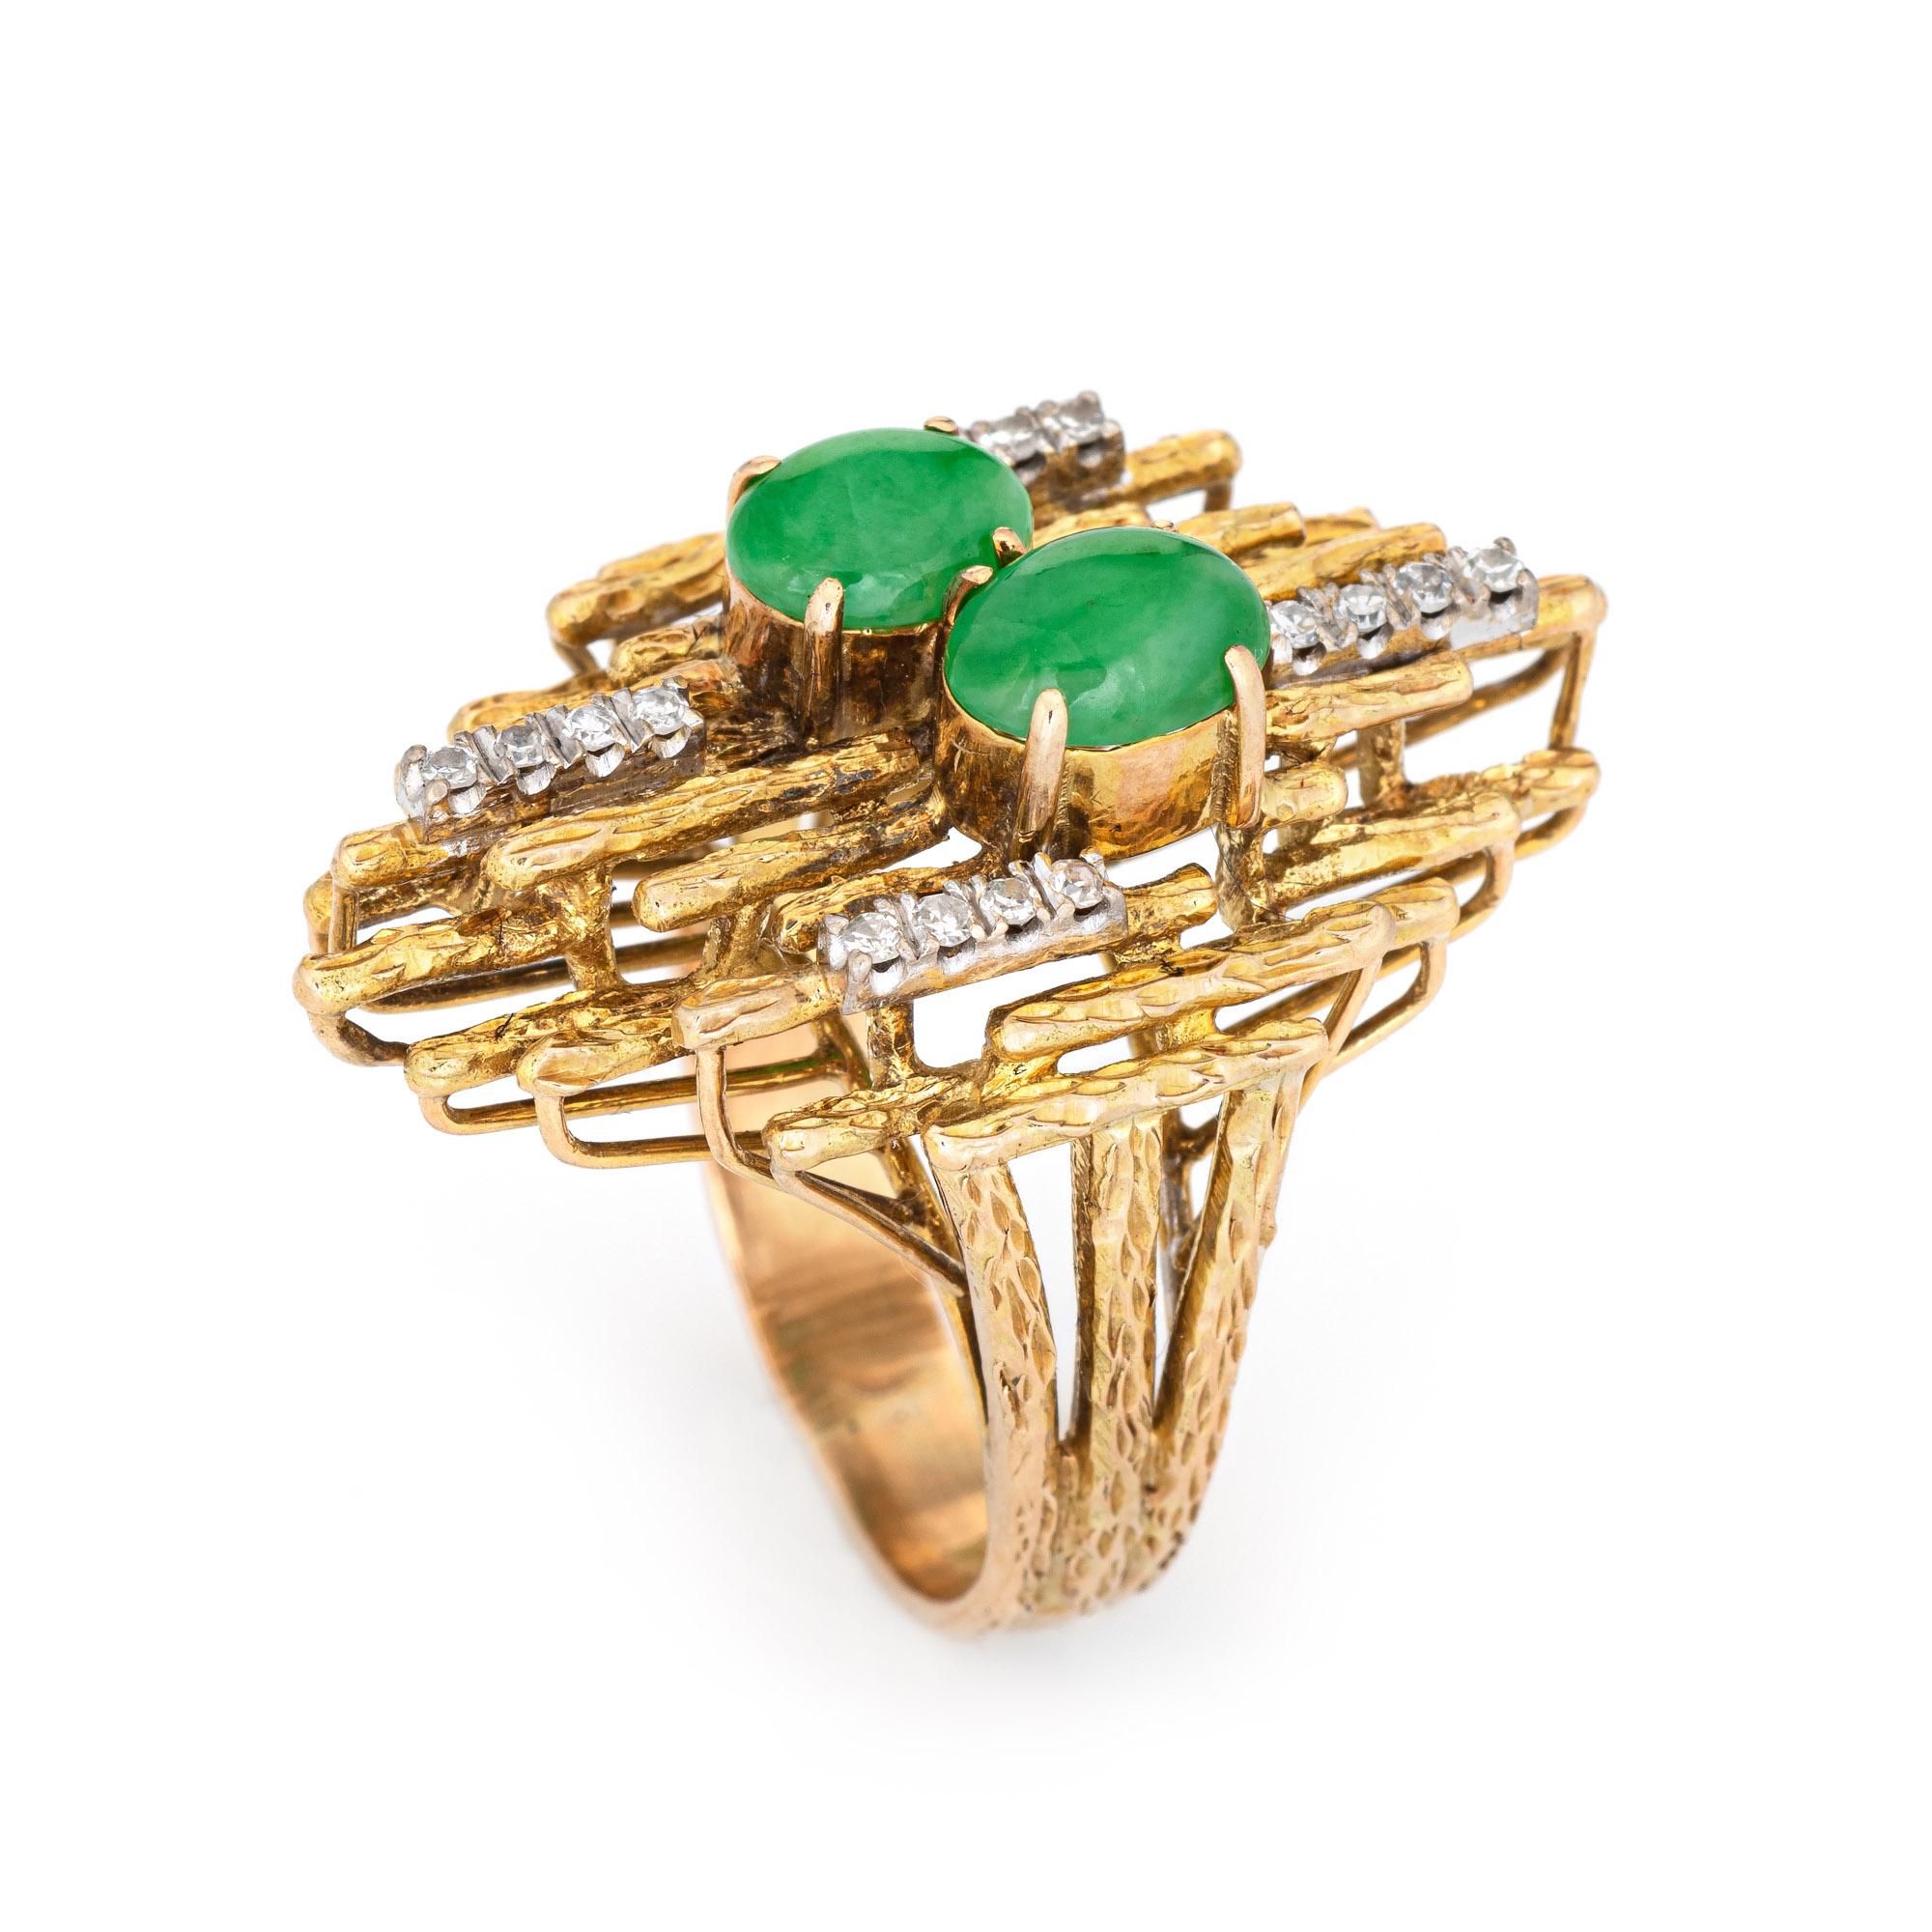 Stylish vintage abstract jade & diamond ring (circa 1970s) crafted in 14 karat yellow gold. 

Jade cabochons are estimated at 1 carat each (2 carats total estimated weight). Diamonds total an estimated 0.10 carats (estimated at H-I color and VS2-I2